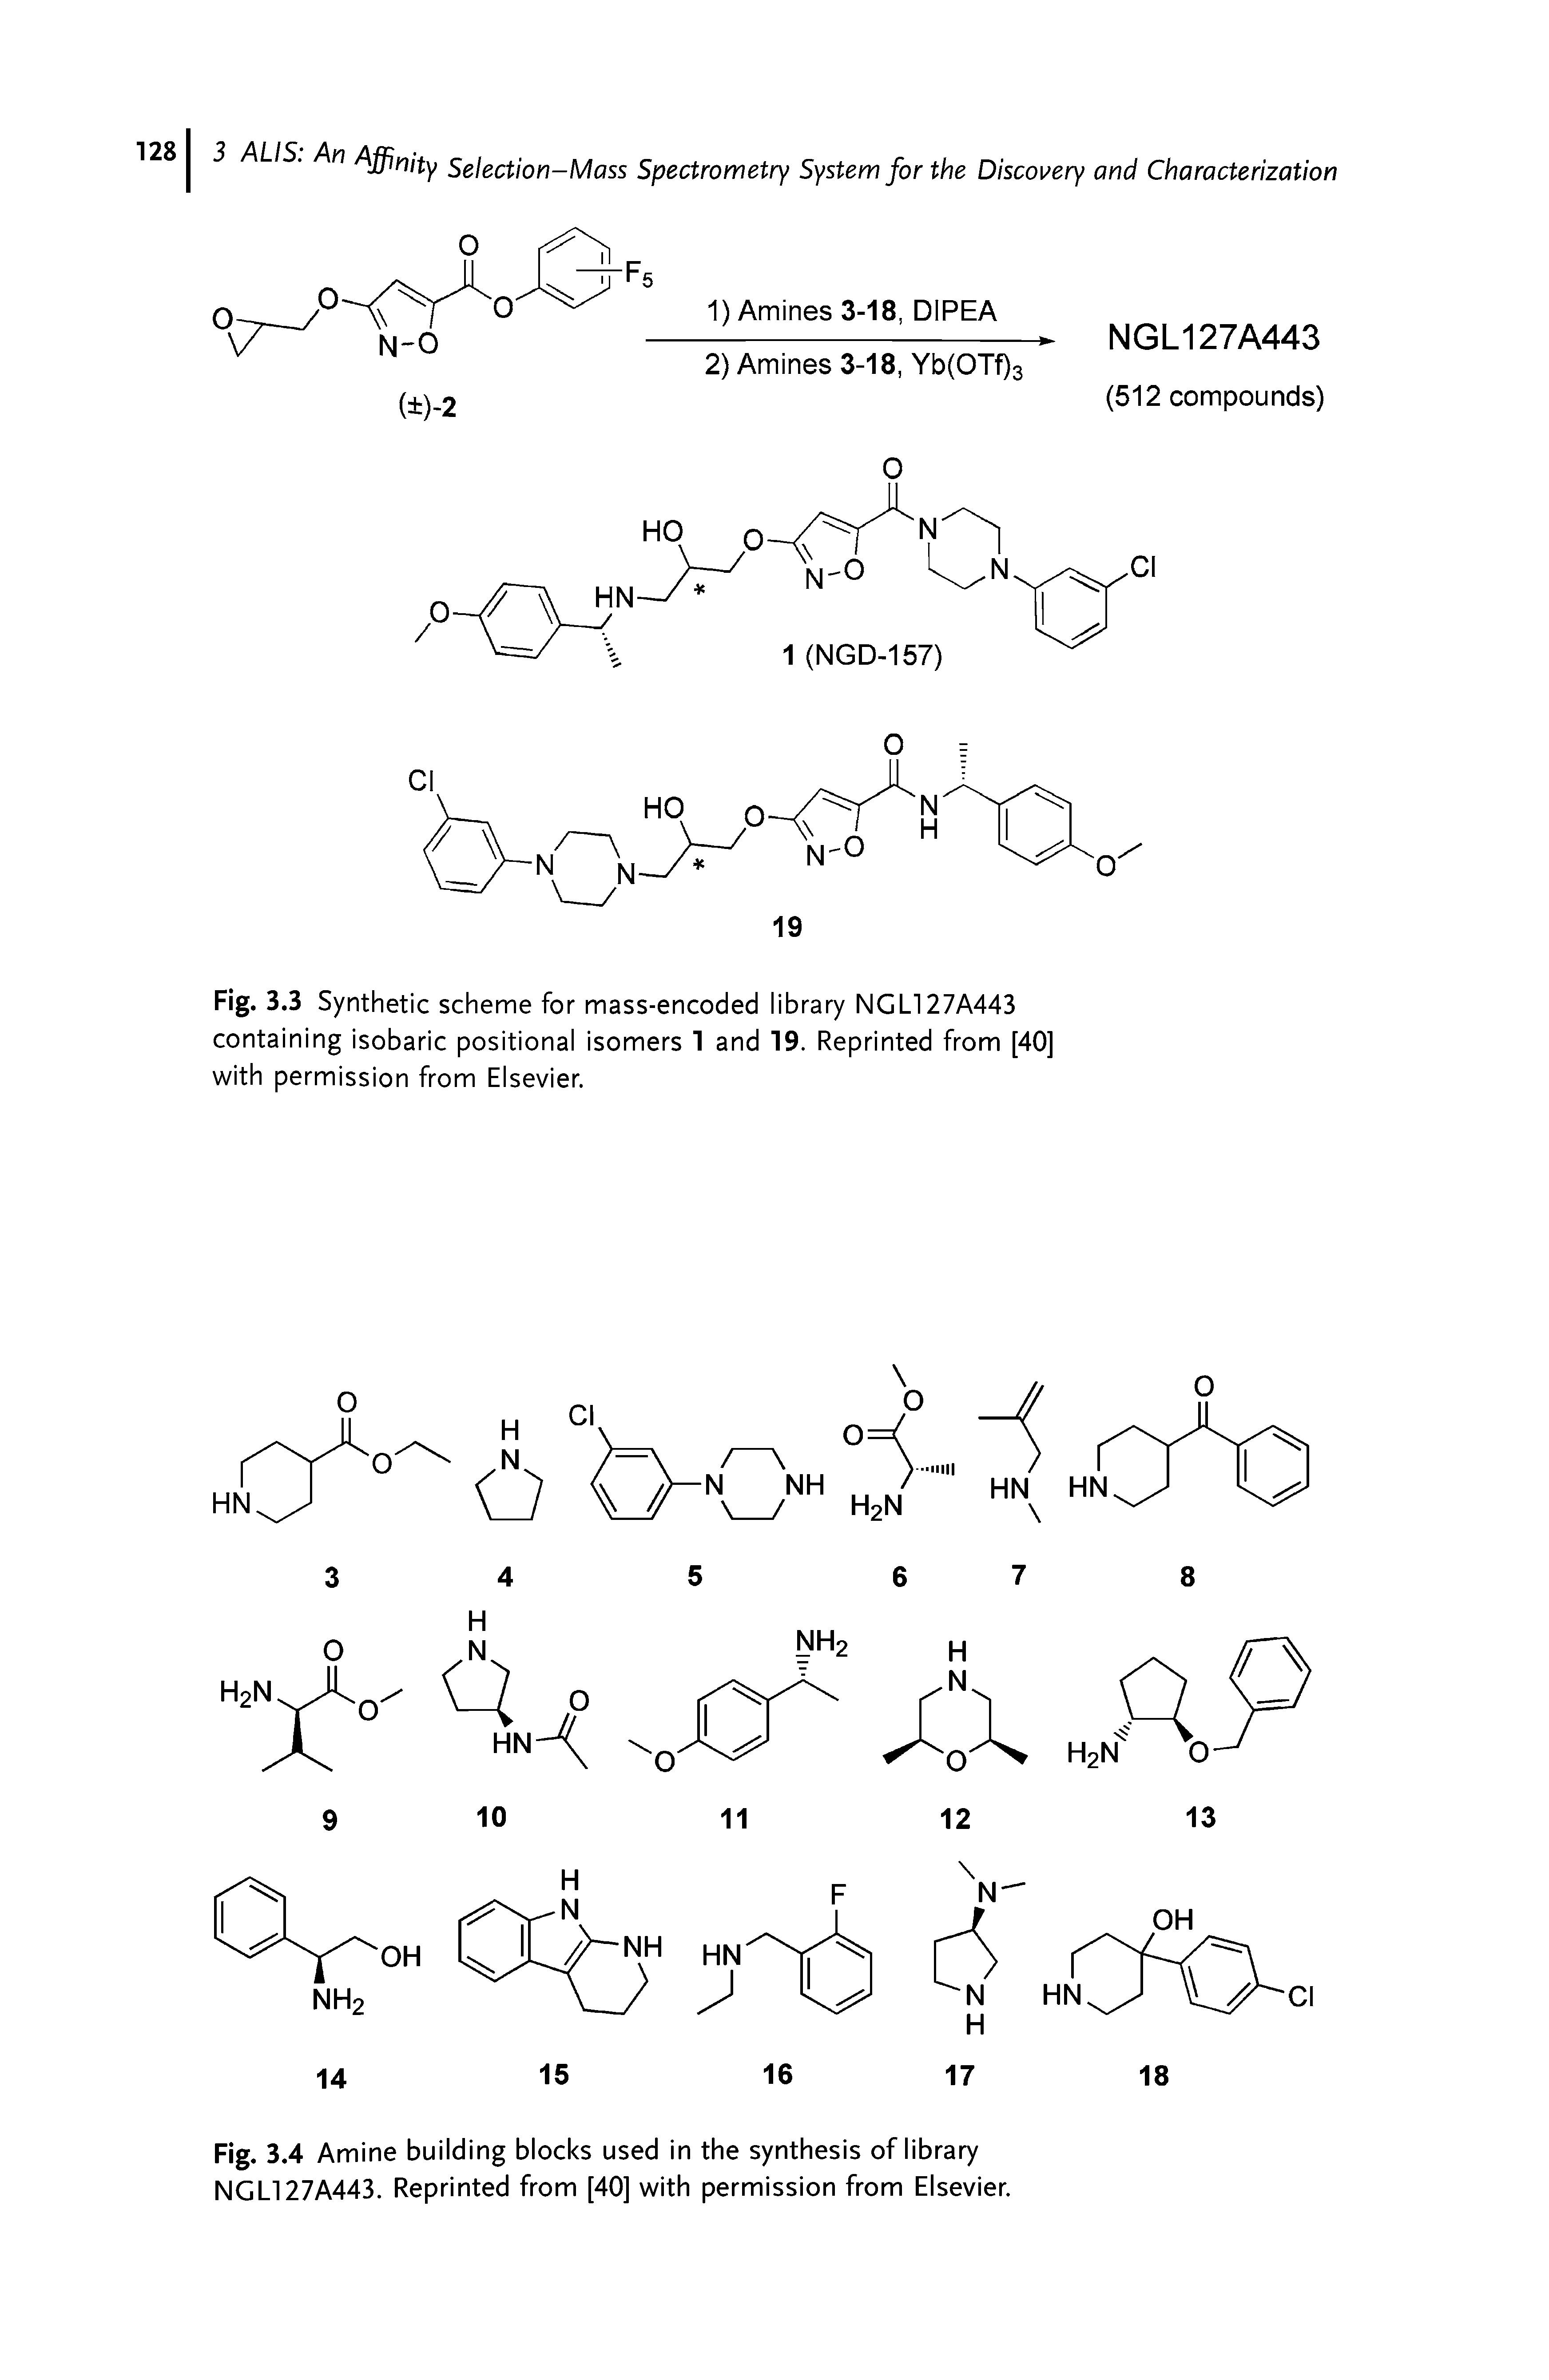 Fig. 3.3 Synthetic scheme for mass-encoded library NGL127A443 containing isobaric positional isomers 1 and 19. Reprinted from [40] with permission from Elsevier.